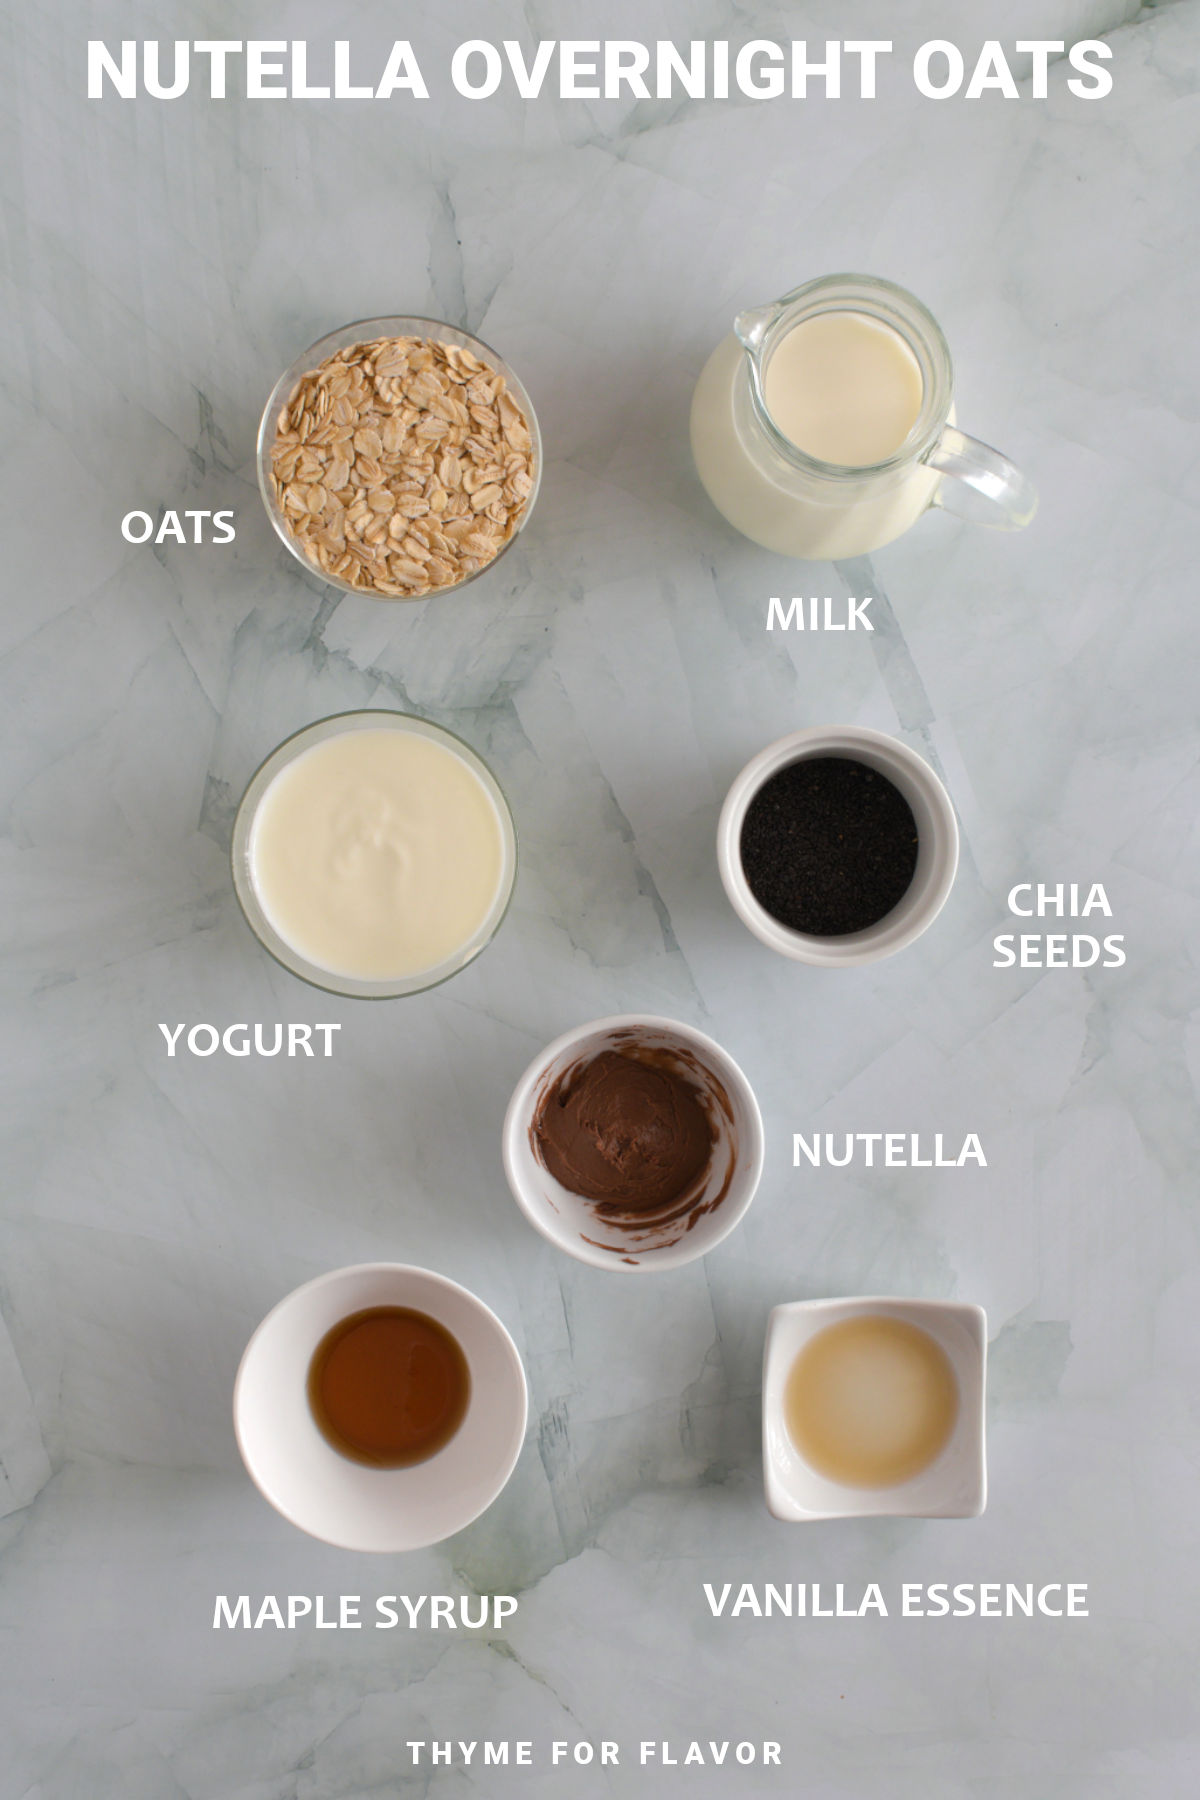 Nutella overnight oats ingredients.